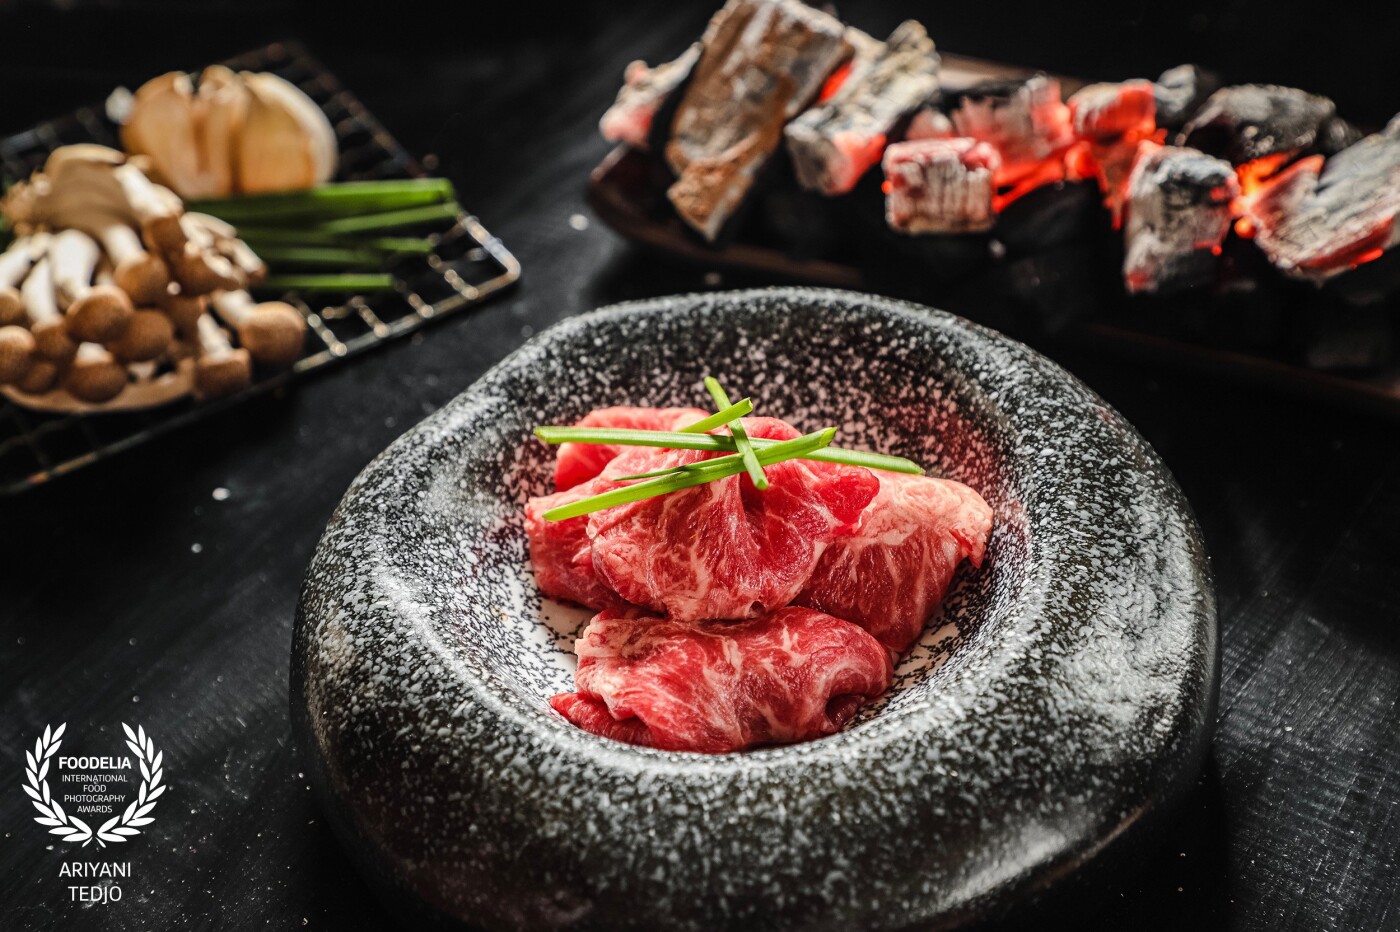 Wagyu Kiriotoshi. Japan has its premium, world-class beef variety called Wagyu. Kiriotoshi means thinly sliced of meat. This meat is superb for grilling. Some bunashimeji mushroom and garlic will definitely be included in the grill. <br />
<br />
The idea for this shot first started with the bowl that made to resemble a stone. Then I looked for an idea what to shoot this with. Upon seeing the beautiful meat in the supermarket, then I decided that it is the perfect food for the shot with the gorgeous bowl.